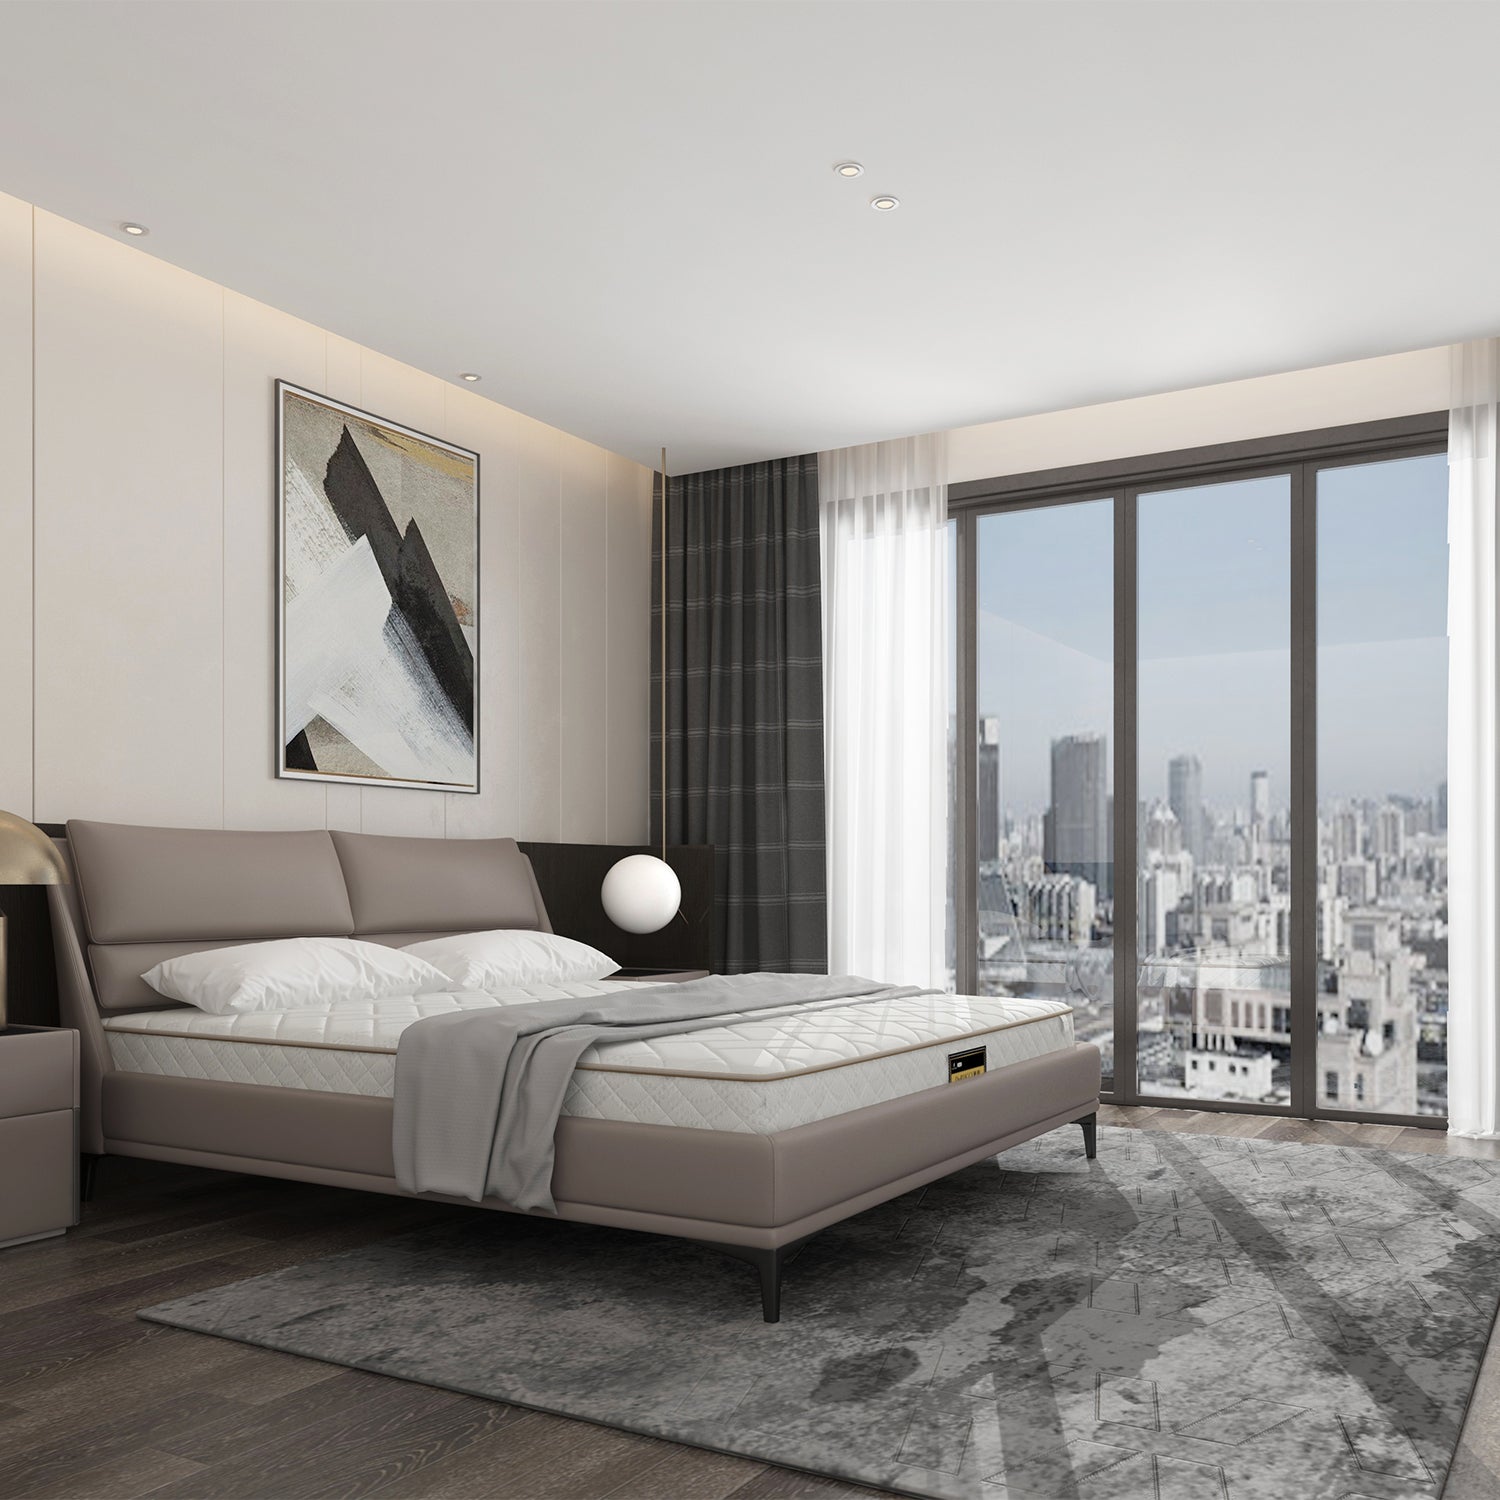 Modern bedroom with grey upholstered bed frame, mattress, grey bedding, large window with city views, bedside table with lamp, grey area rug, and abstract art piece on wall.